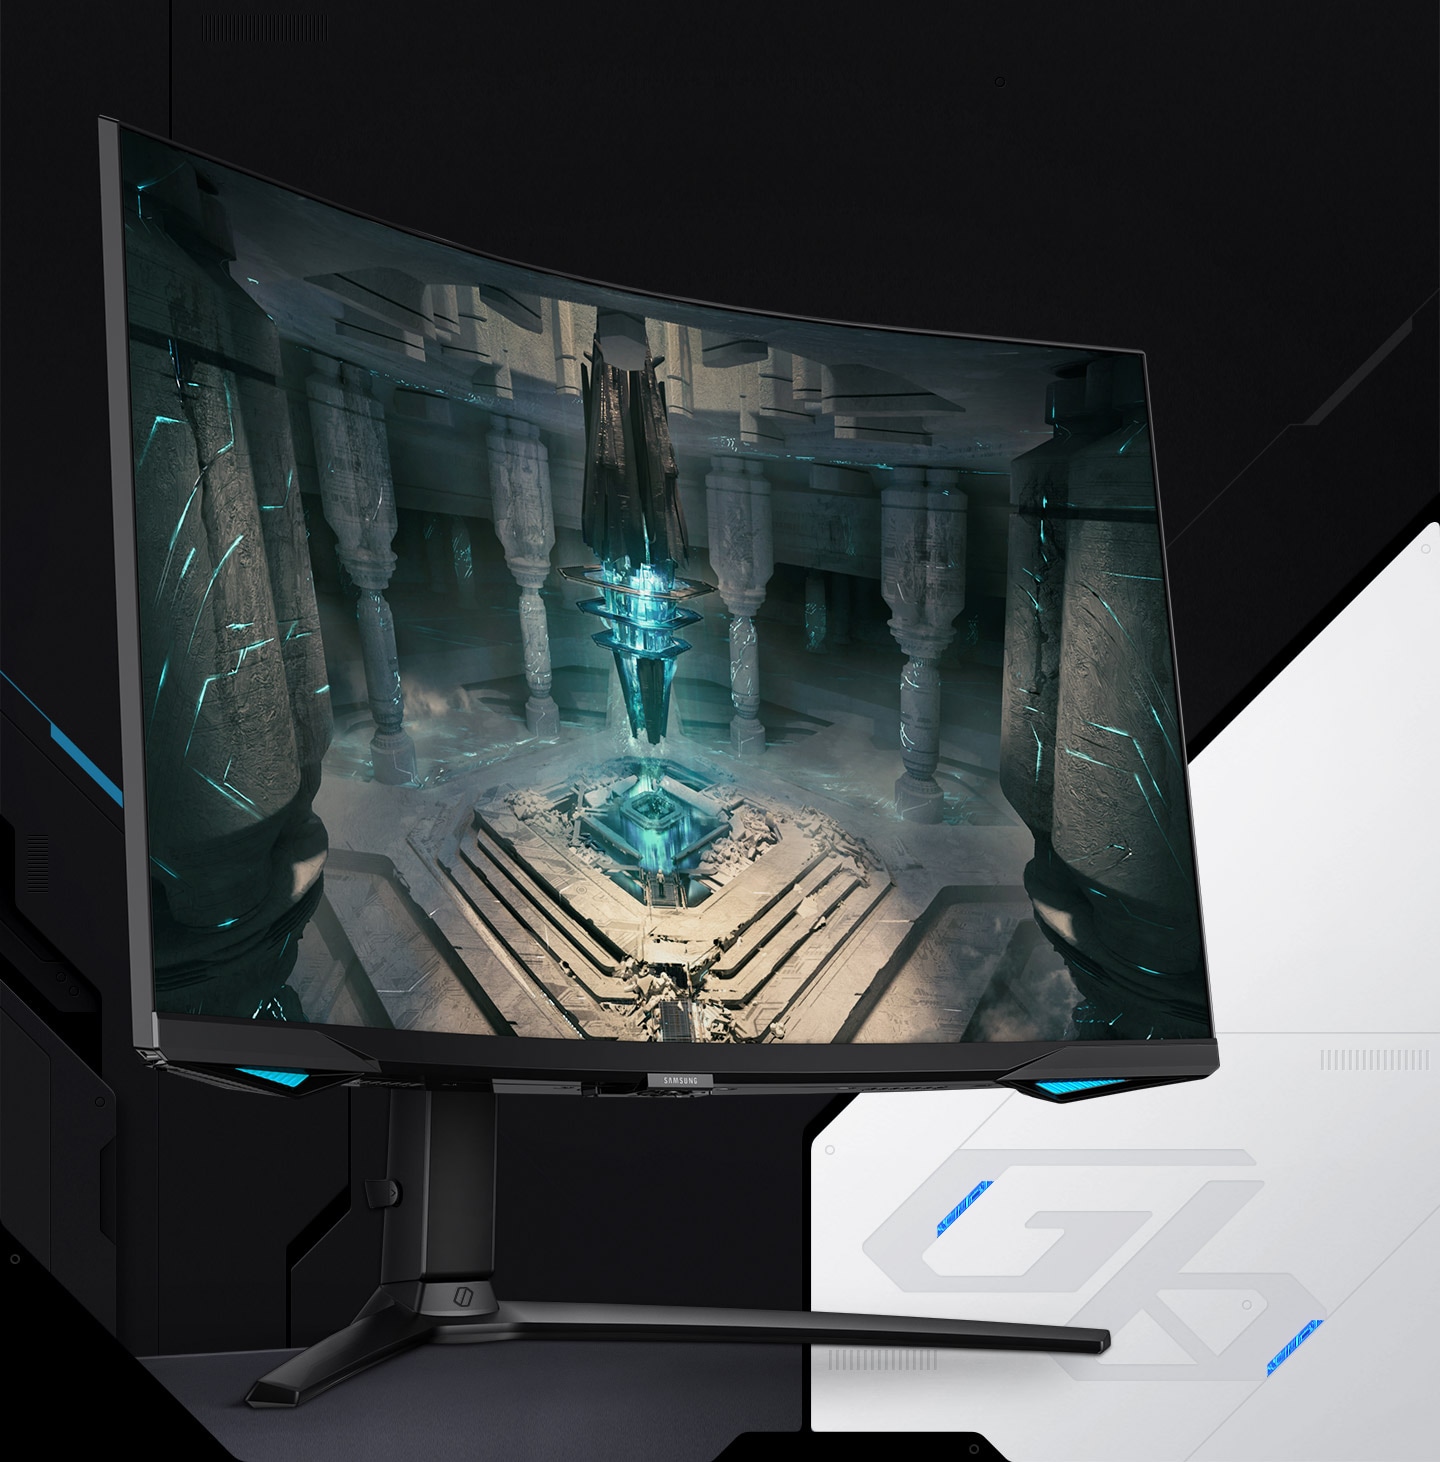 On the monitor display is a skyblue rocket ship with light emitting from its engine exhausts inside an underground cave. The rocket ship is set to launch out of the opening above, and surrounded by stone pillars and steps. &quot"G6&quot" logo is placed on the right side of the monitor stand.